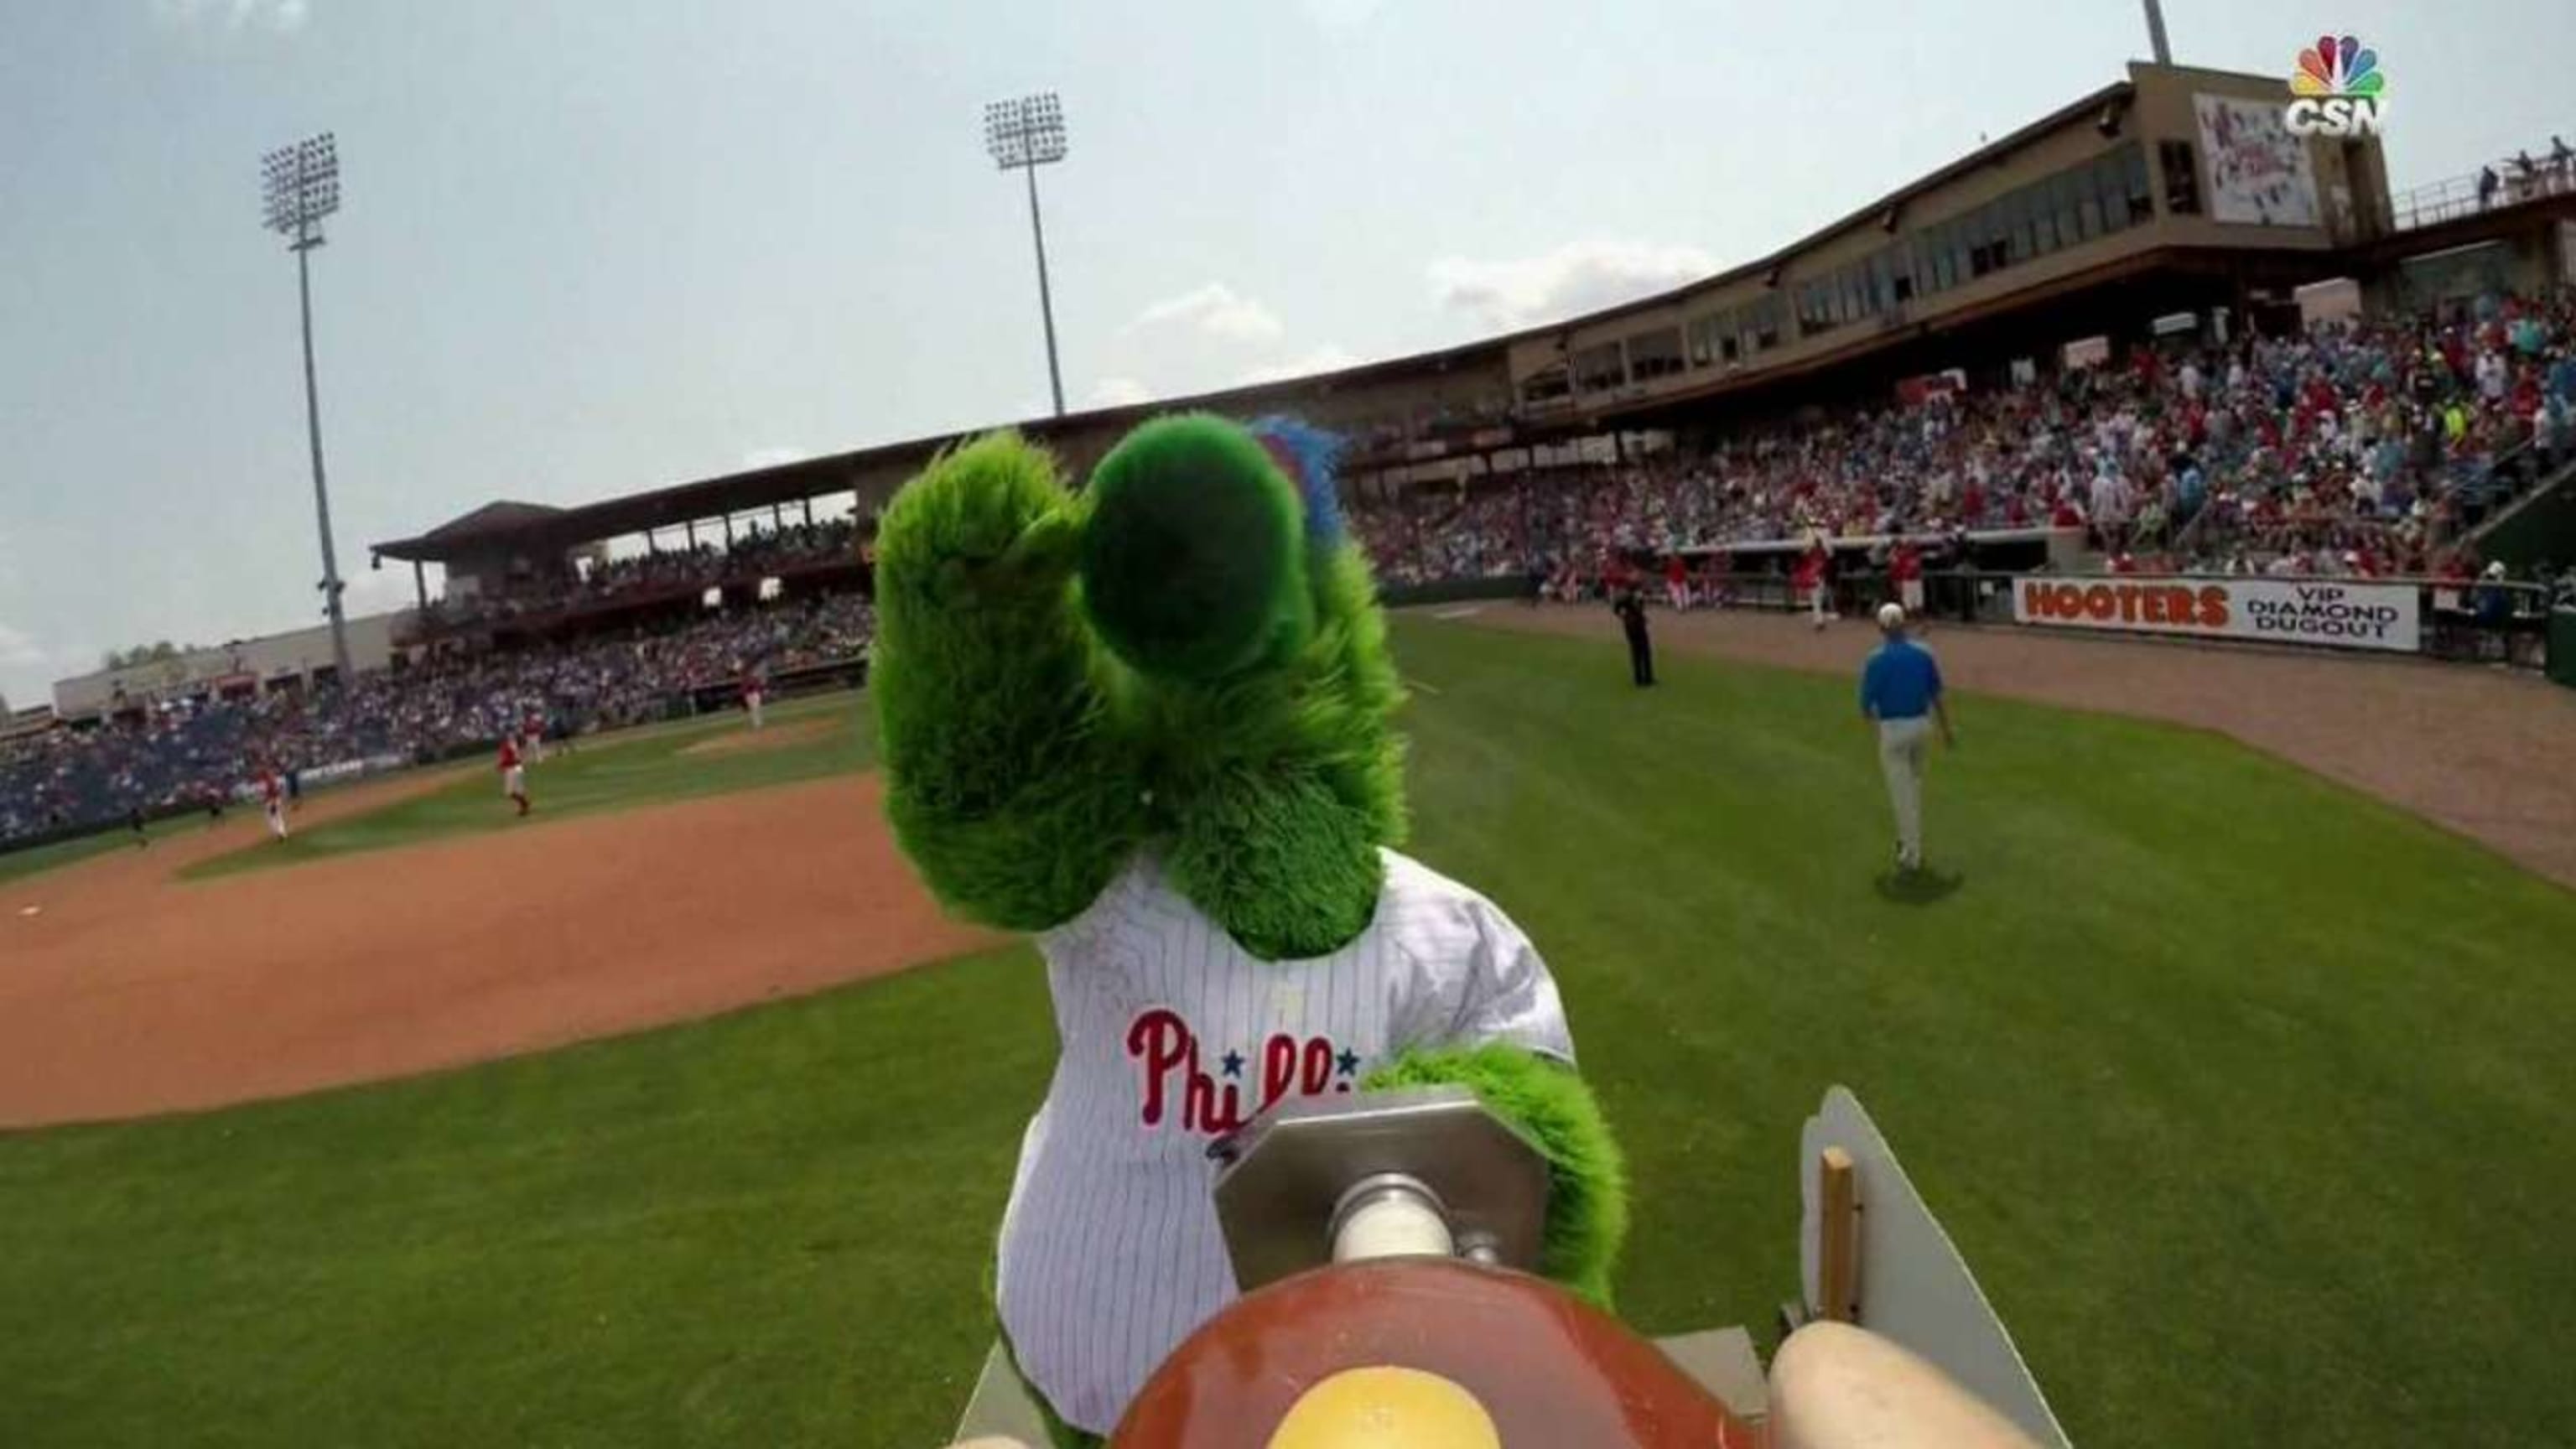 Why the Phillie Phanatic Is a World Series Winner - The Atlantic